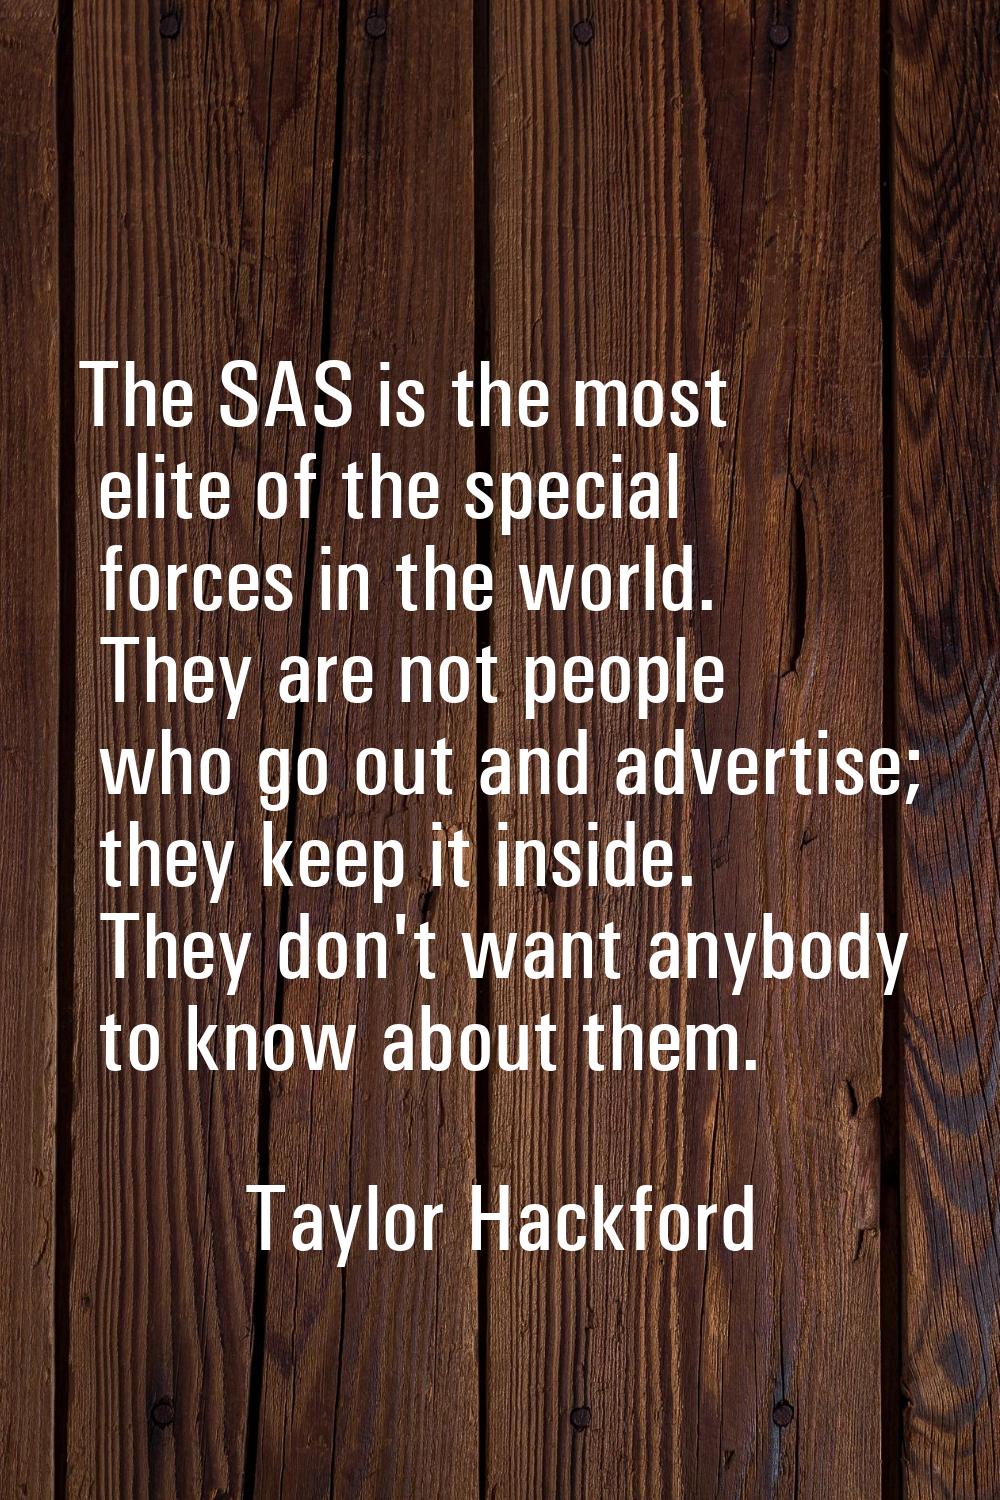 The SAS is the most elite of the special forces in the world. They are not people who go out and ad